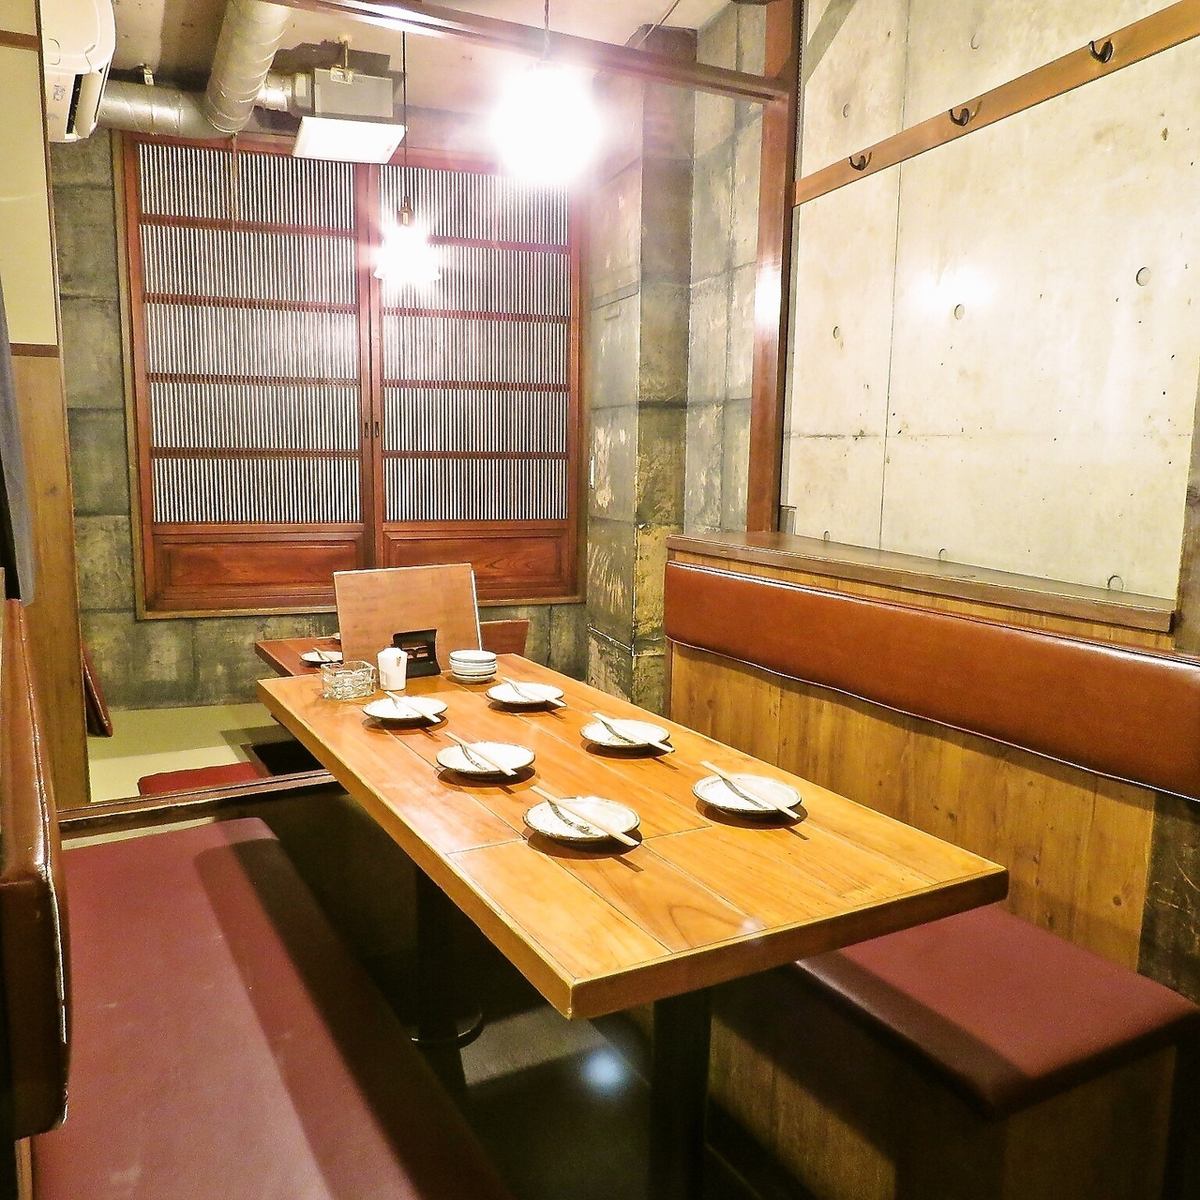 We have a private room that can accommodate up to 11 people.